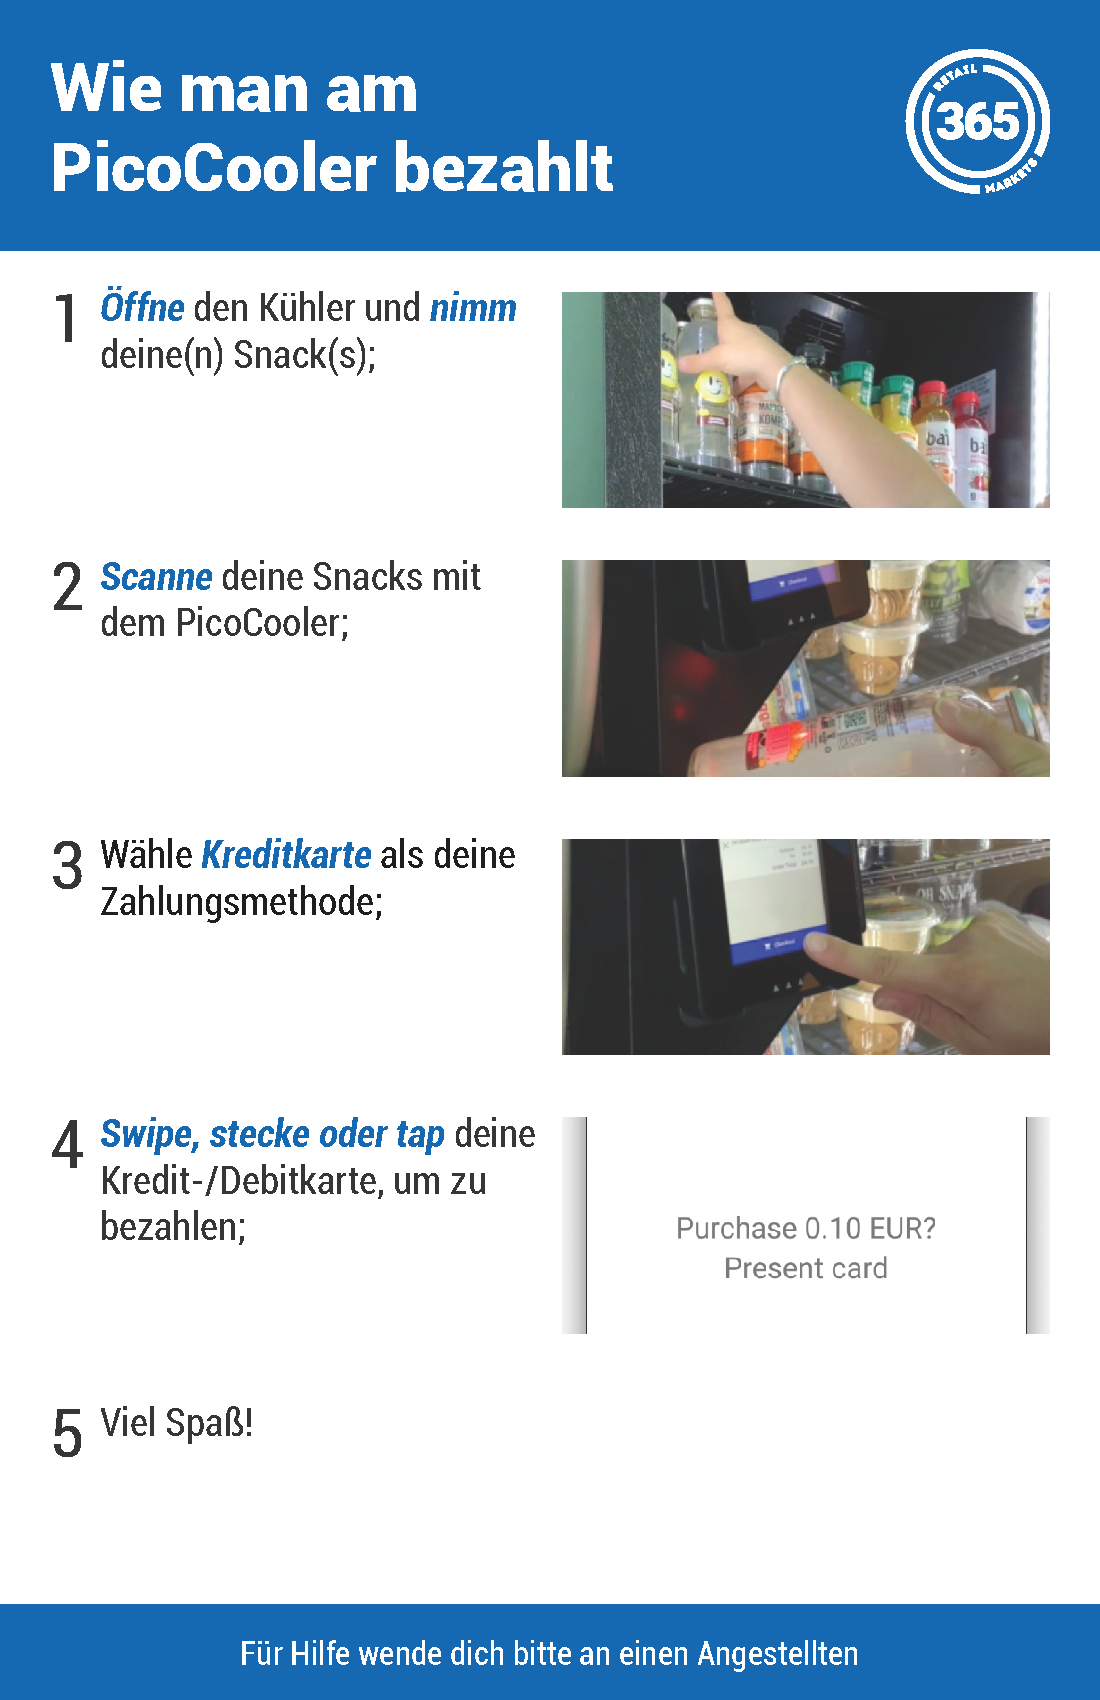 WingCards-PicoCooler-HowToCheckout-Card-International-Unlocked-German.png